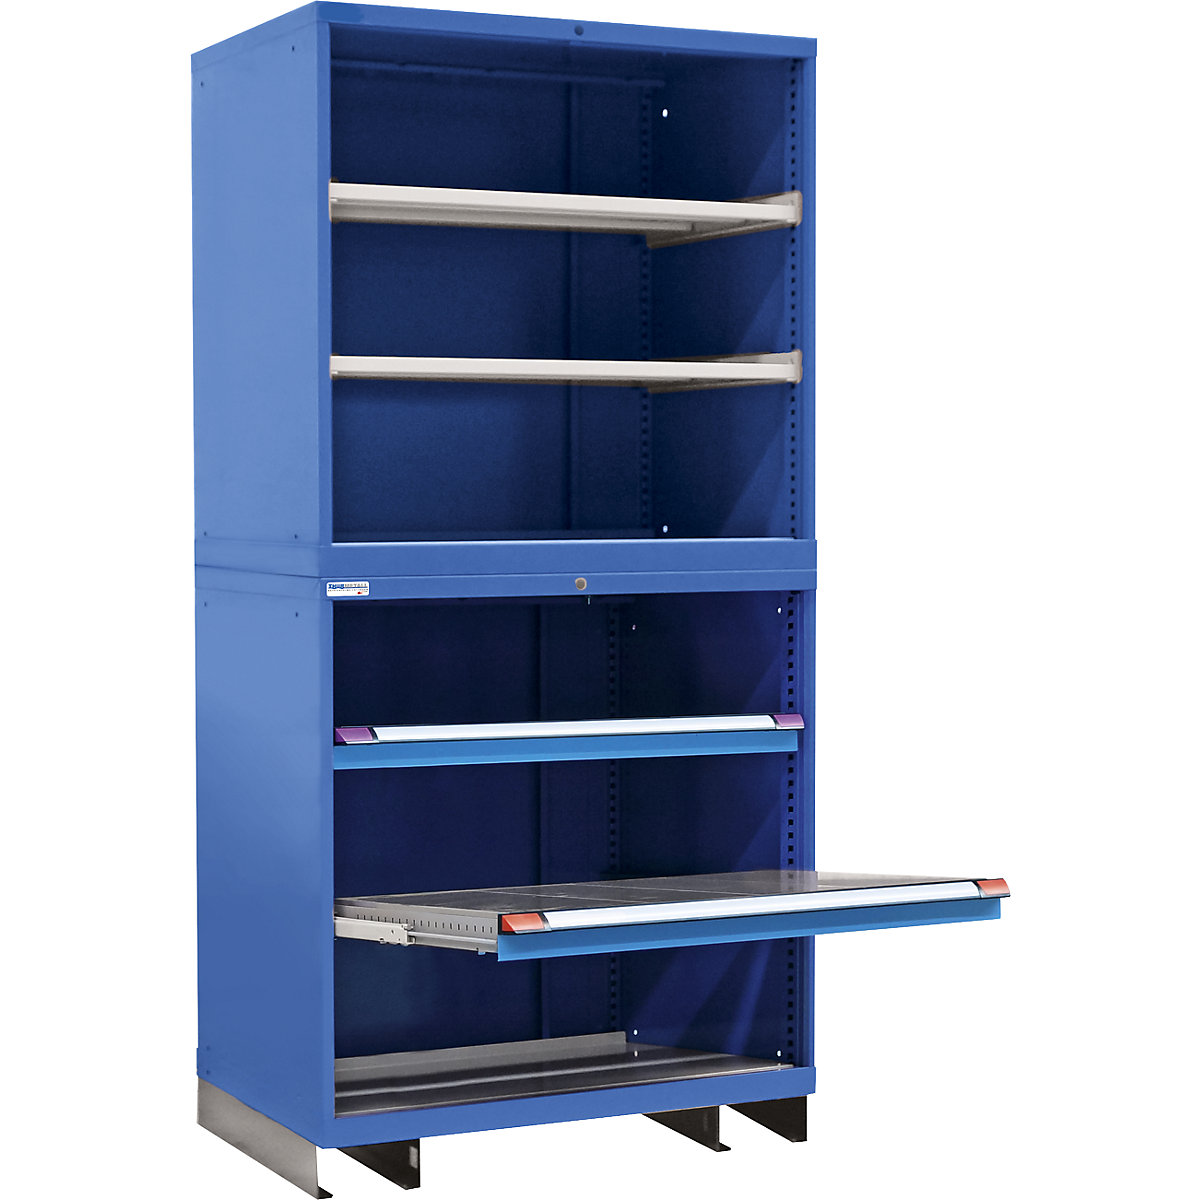 Modular cupboard system, 2 shelves, 2 pull-out shelves, max. load 200 kg, HxWxD 2100 x 1005 x 695 mm-9